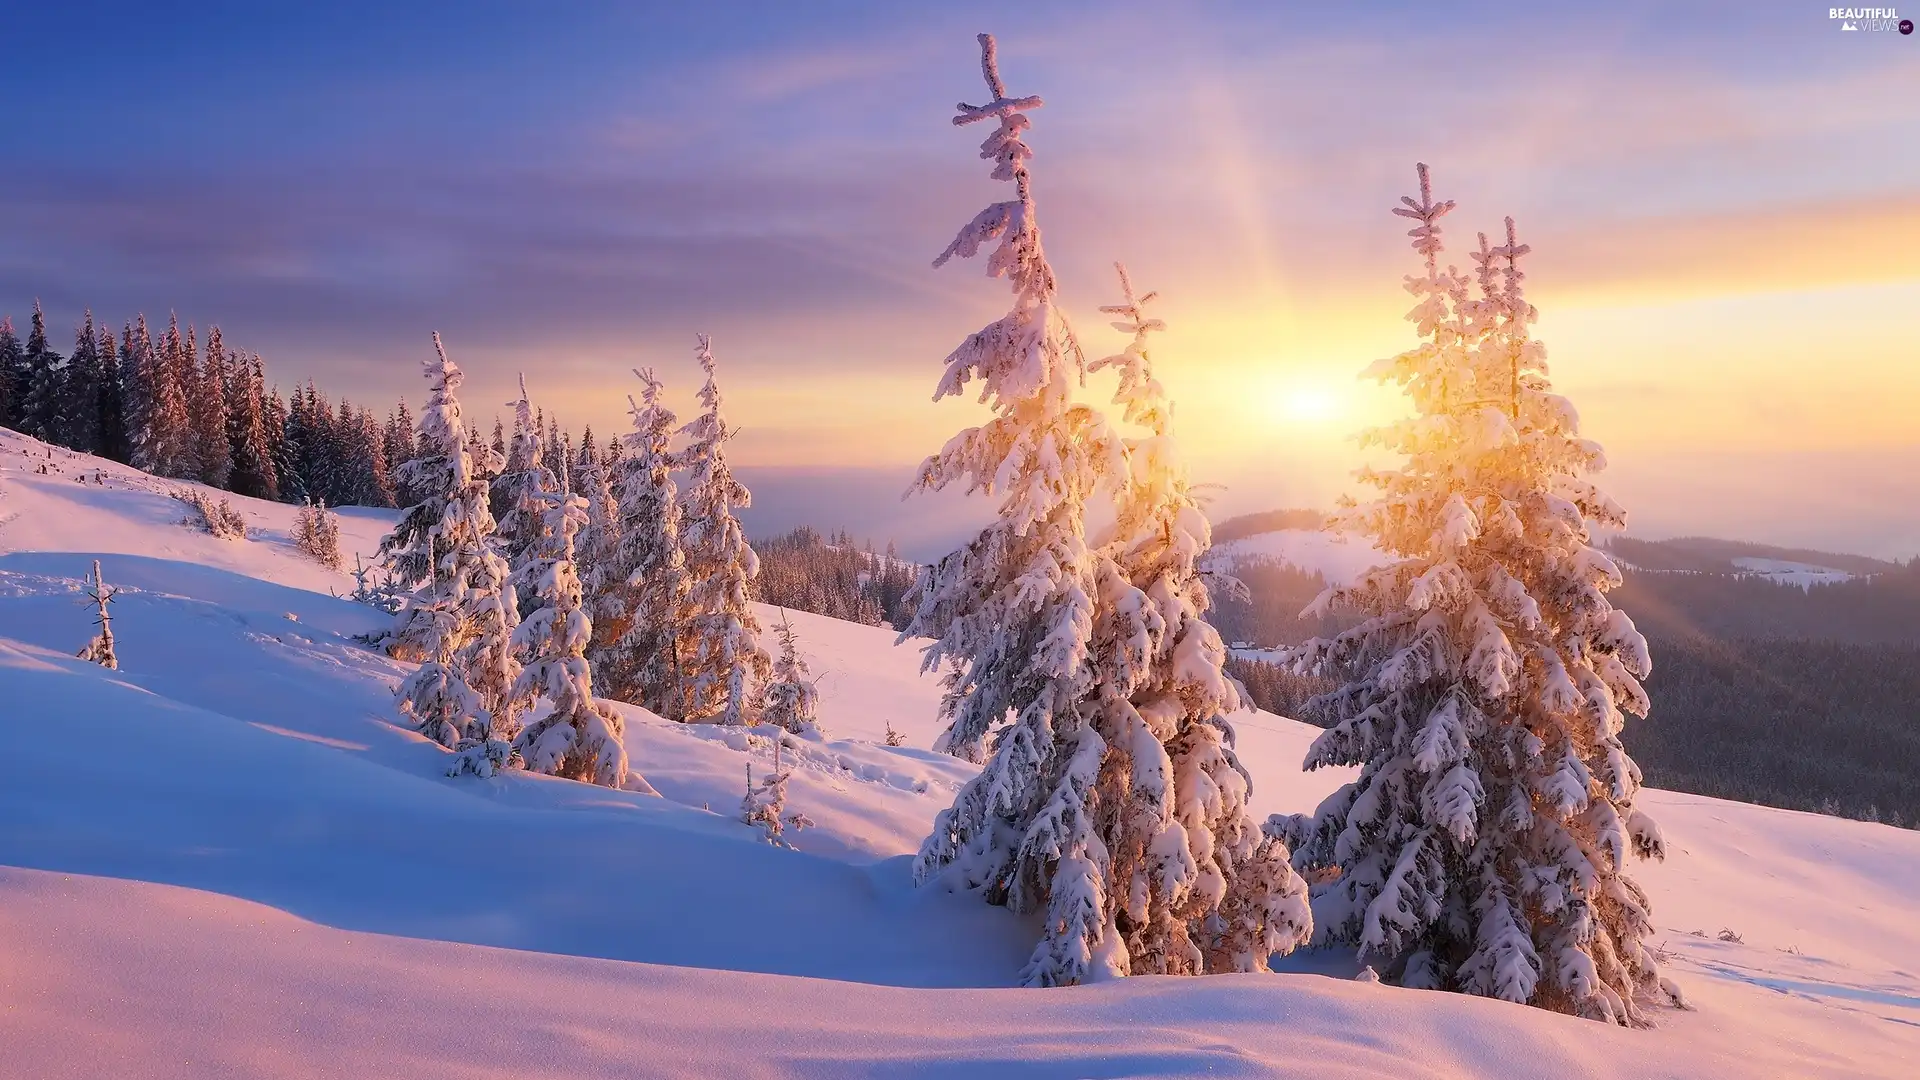 Great Sunsets, The Hills, Snowy, Spruces, winter - Beautiful views ...